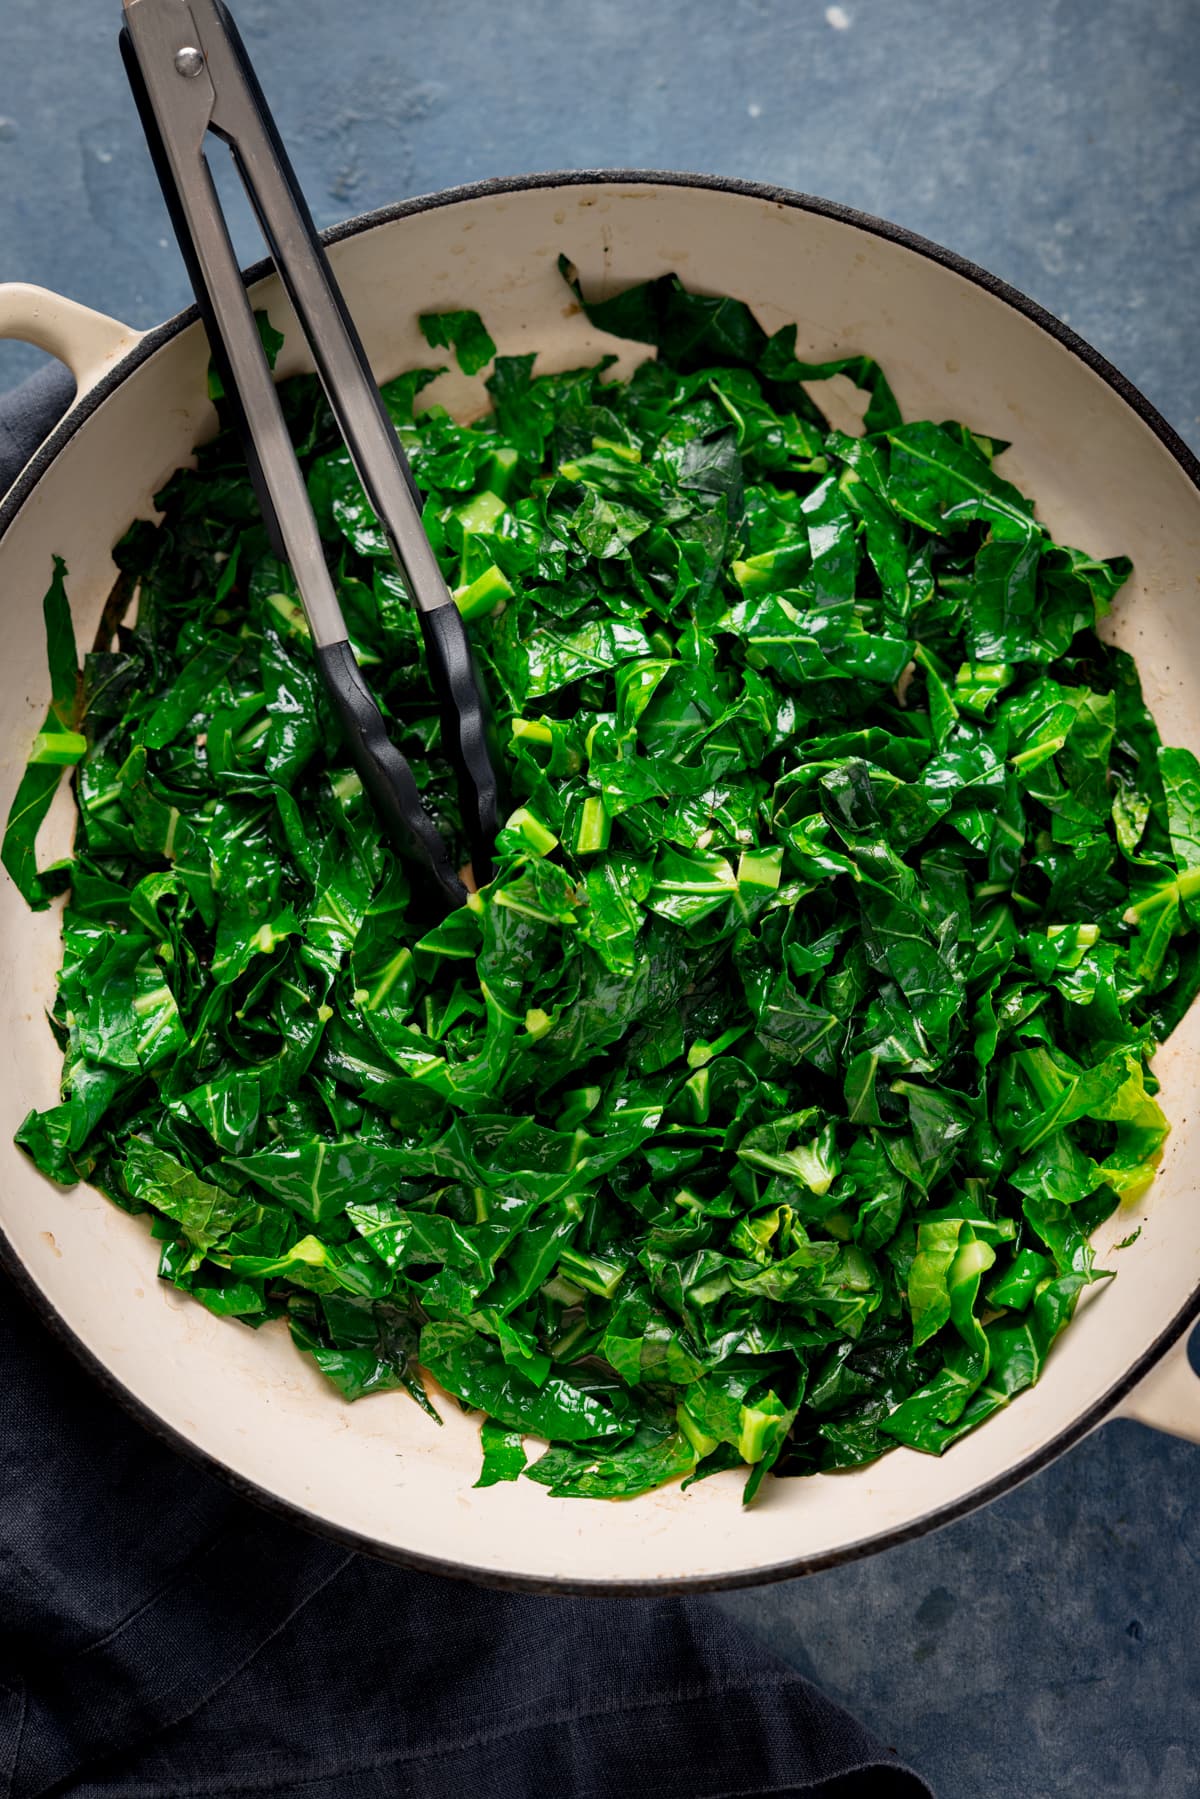 Overhead tall image of pan fried collard greens in a white pan. There is a set of tongs nestled in the spring greens. The pan is on a blue background.